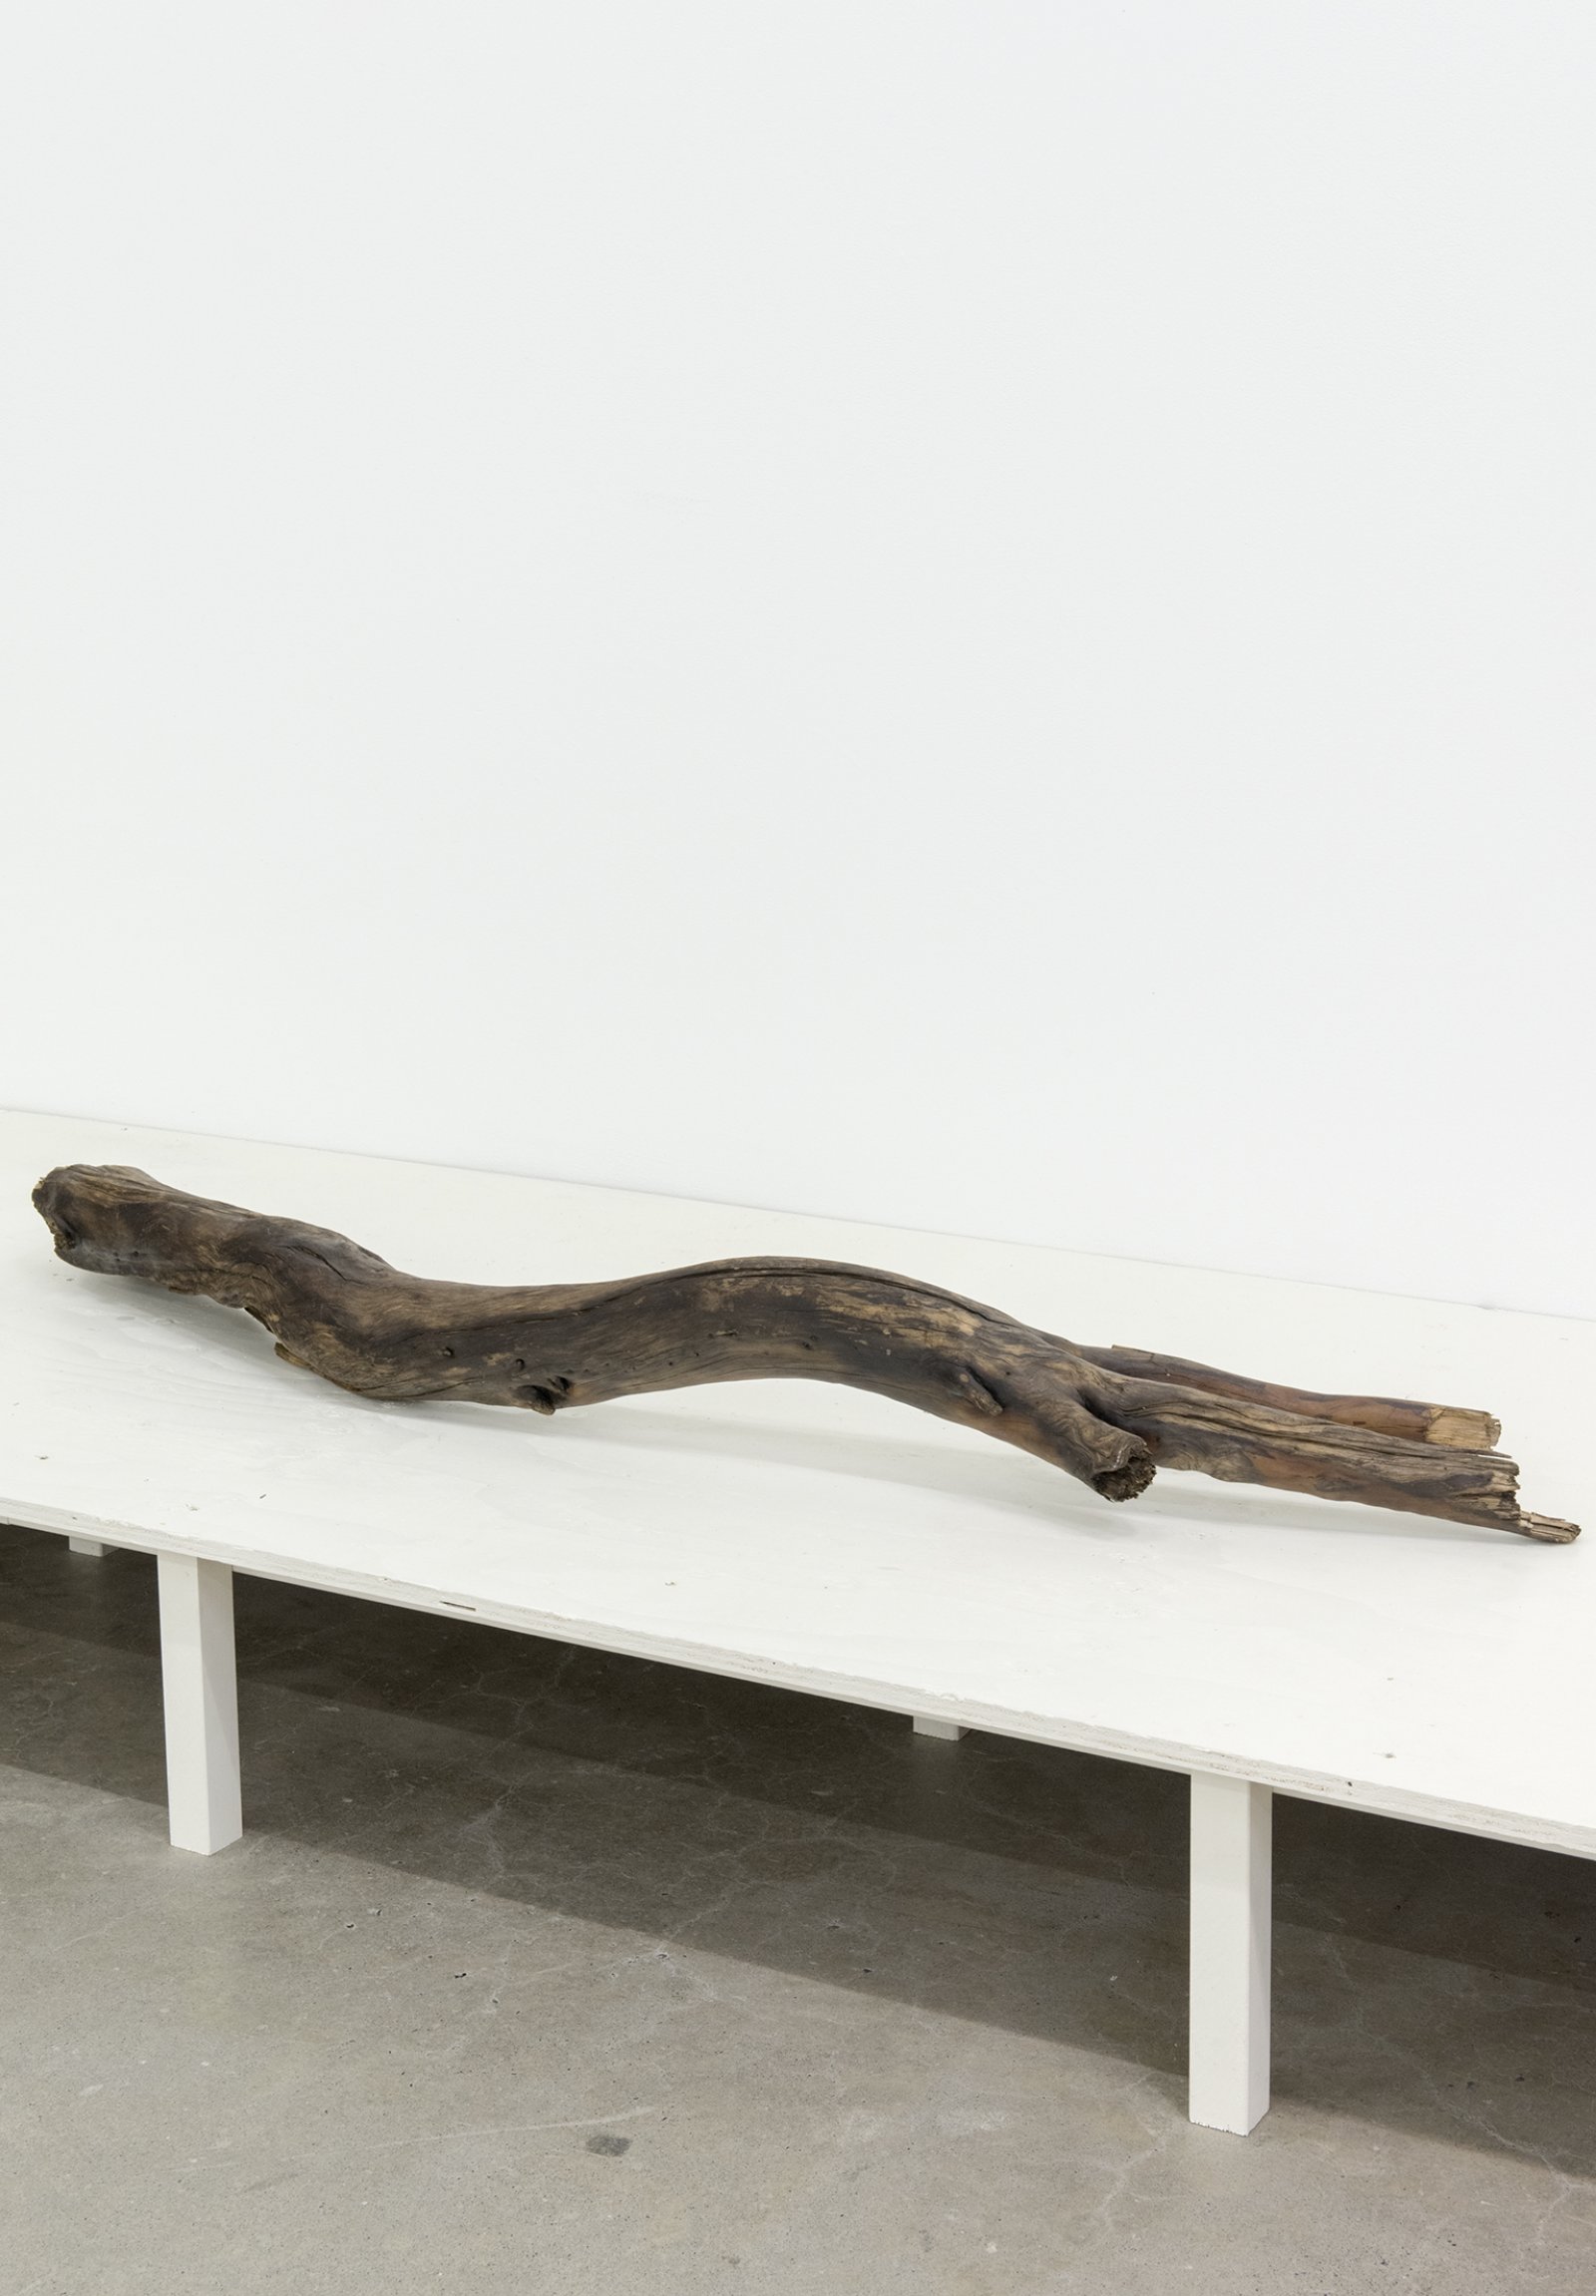 Gareth Moore, W-07F, 2013, arbutus branch found in back alley, walnut oil, geranium oil, clary sage oil, ginger oil, 7 x 59 x 13 in. (17 x 150 x 33 cm)   by Ashes Withyman